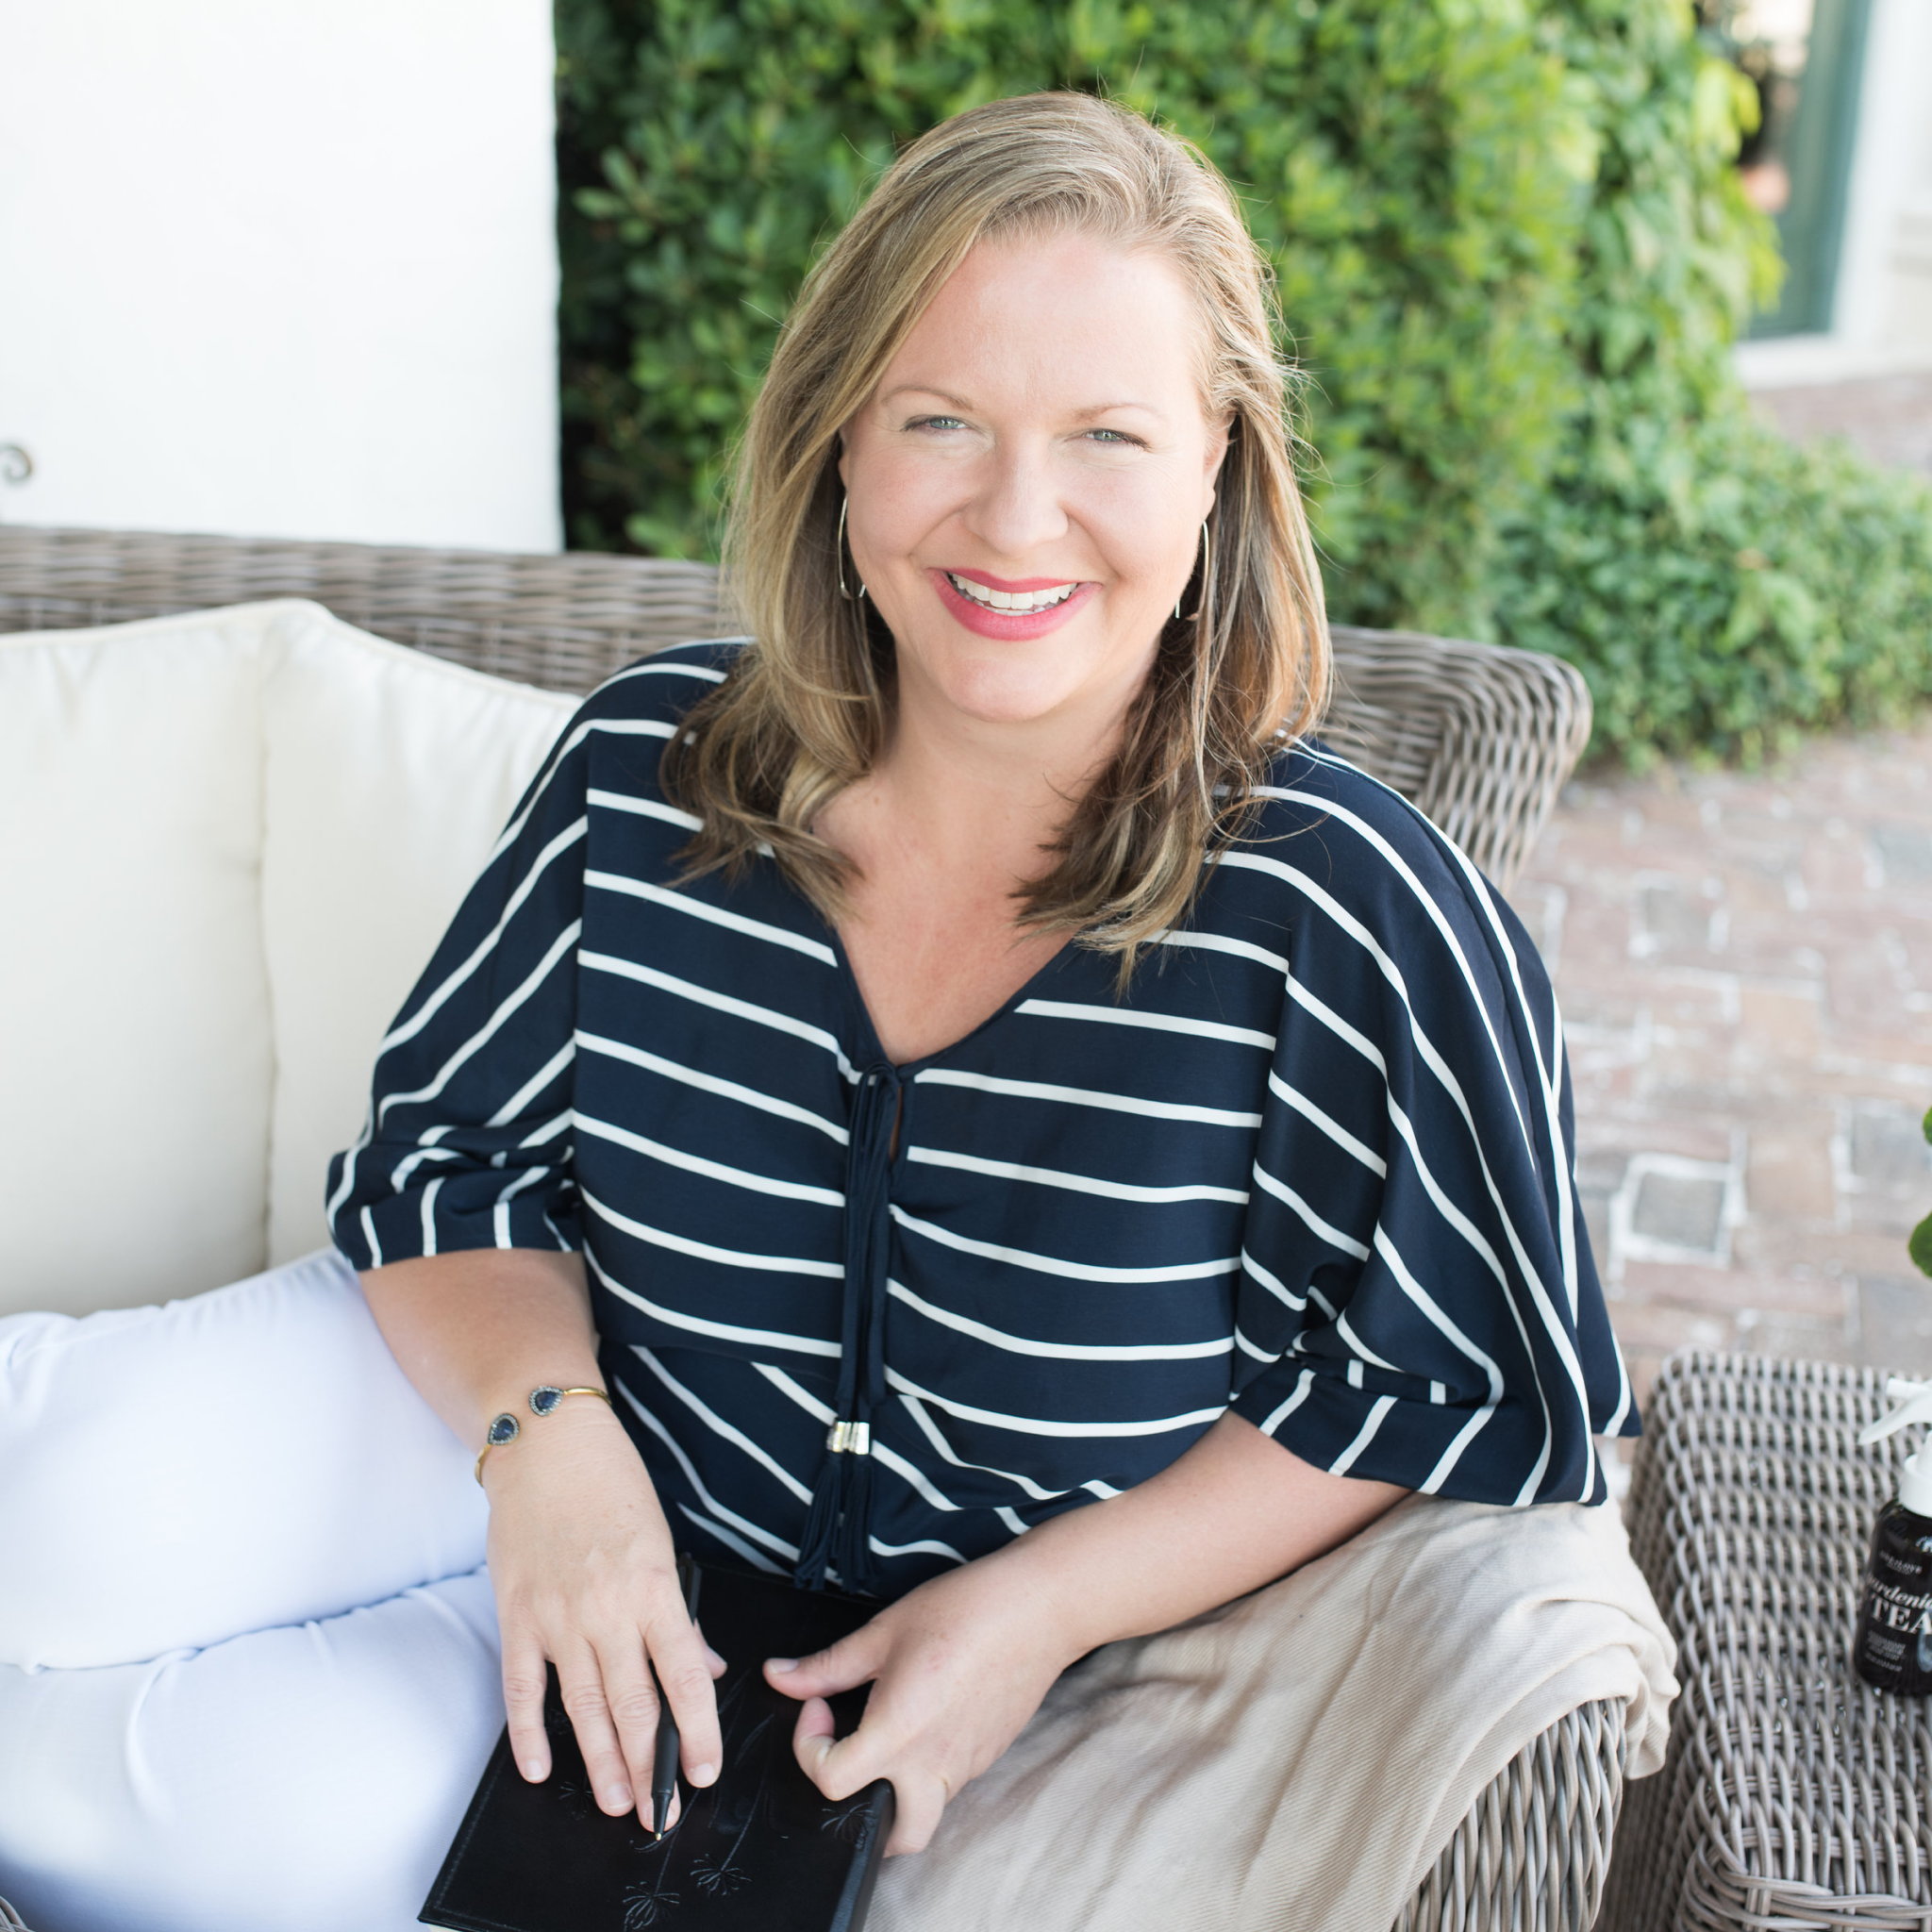 Plant-Powered Skincare: An Interview with Suzanne LeRoux, Founder of One Love Organics